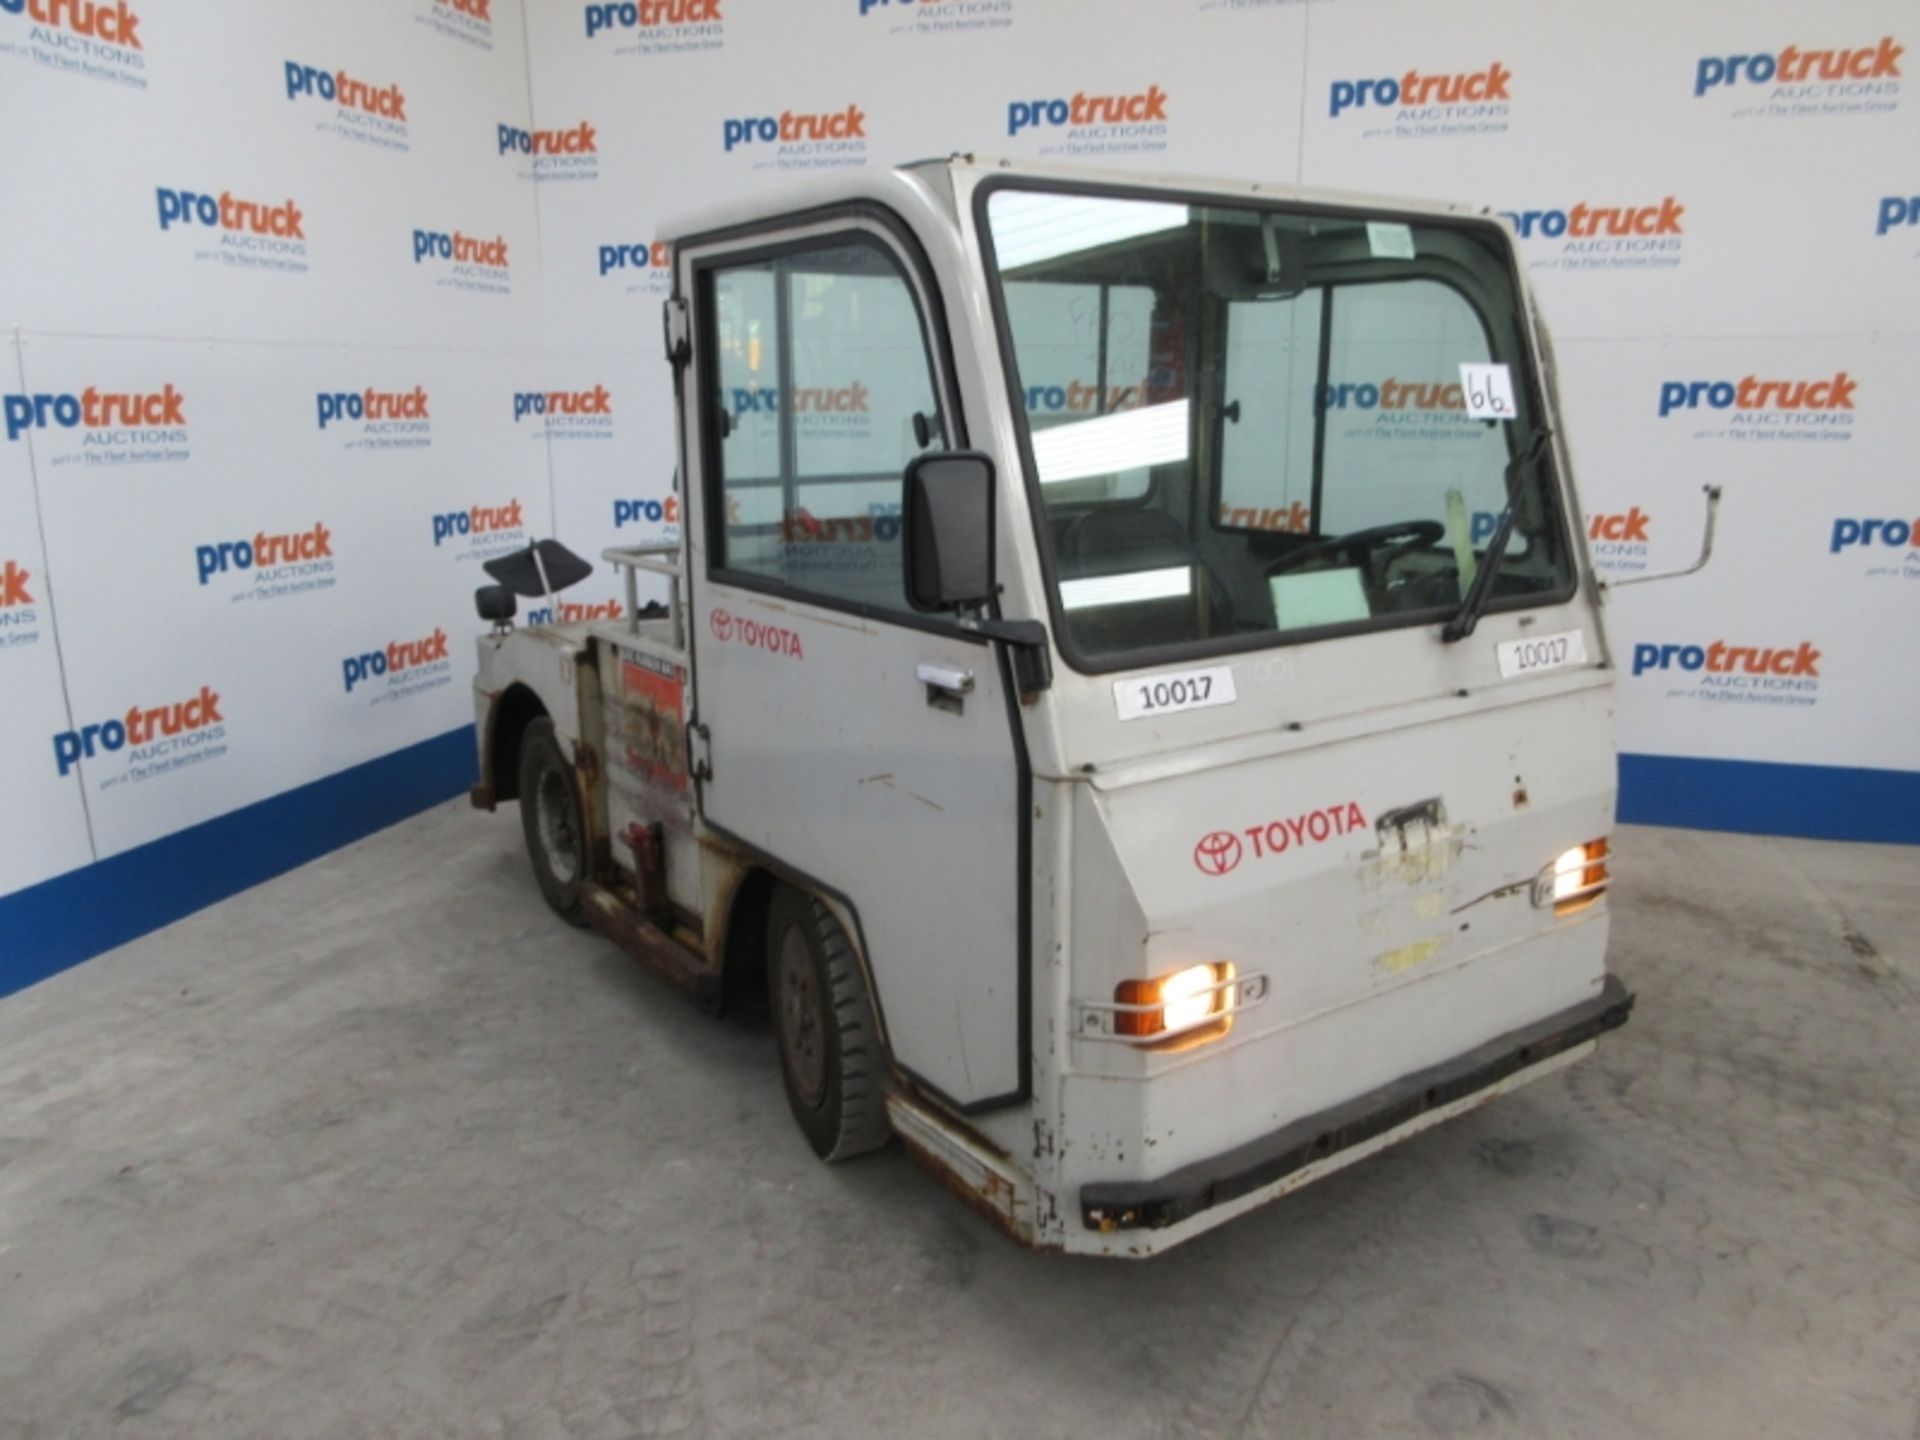 TOYOTA 2TE15 Plant Electric - VIN: 2TE15E10017 - Year: 2007 - 18,841 Hours - Towing Tractor, R.D - Image 2 of 8